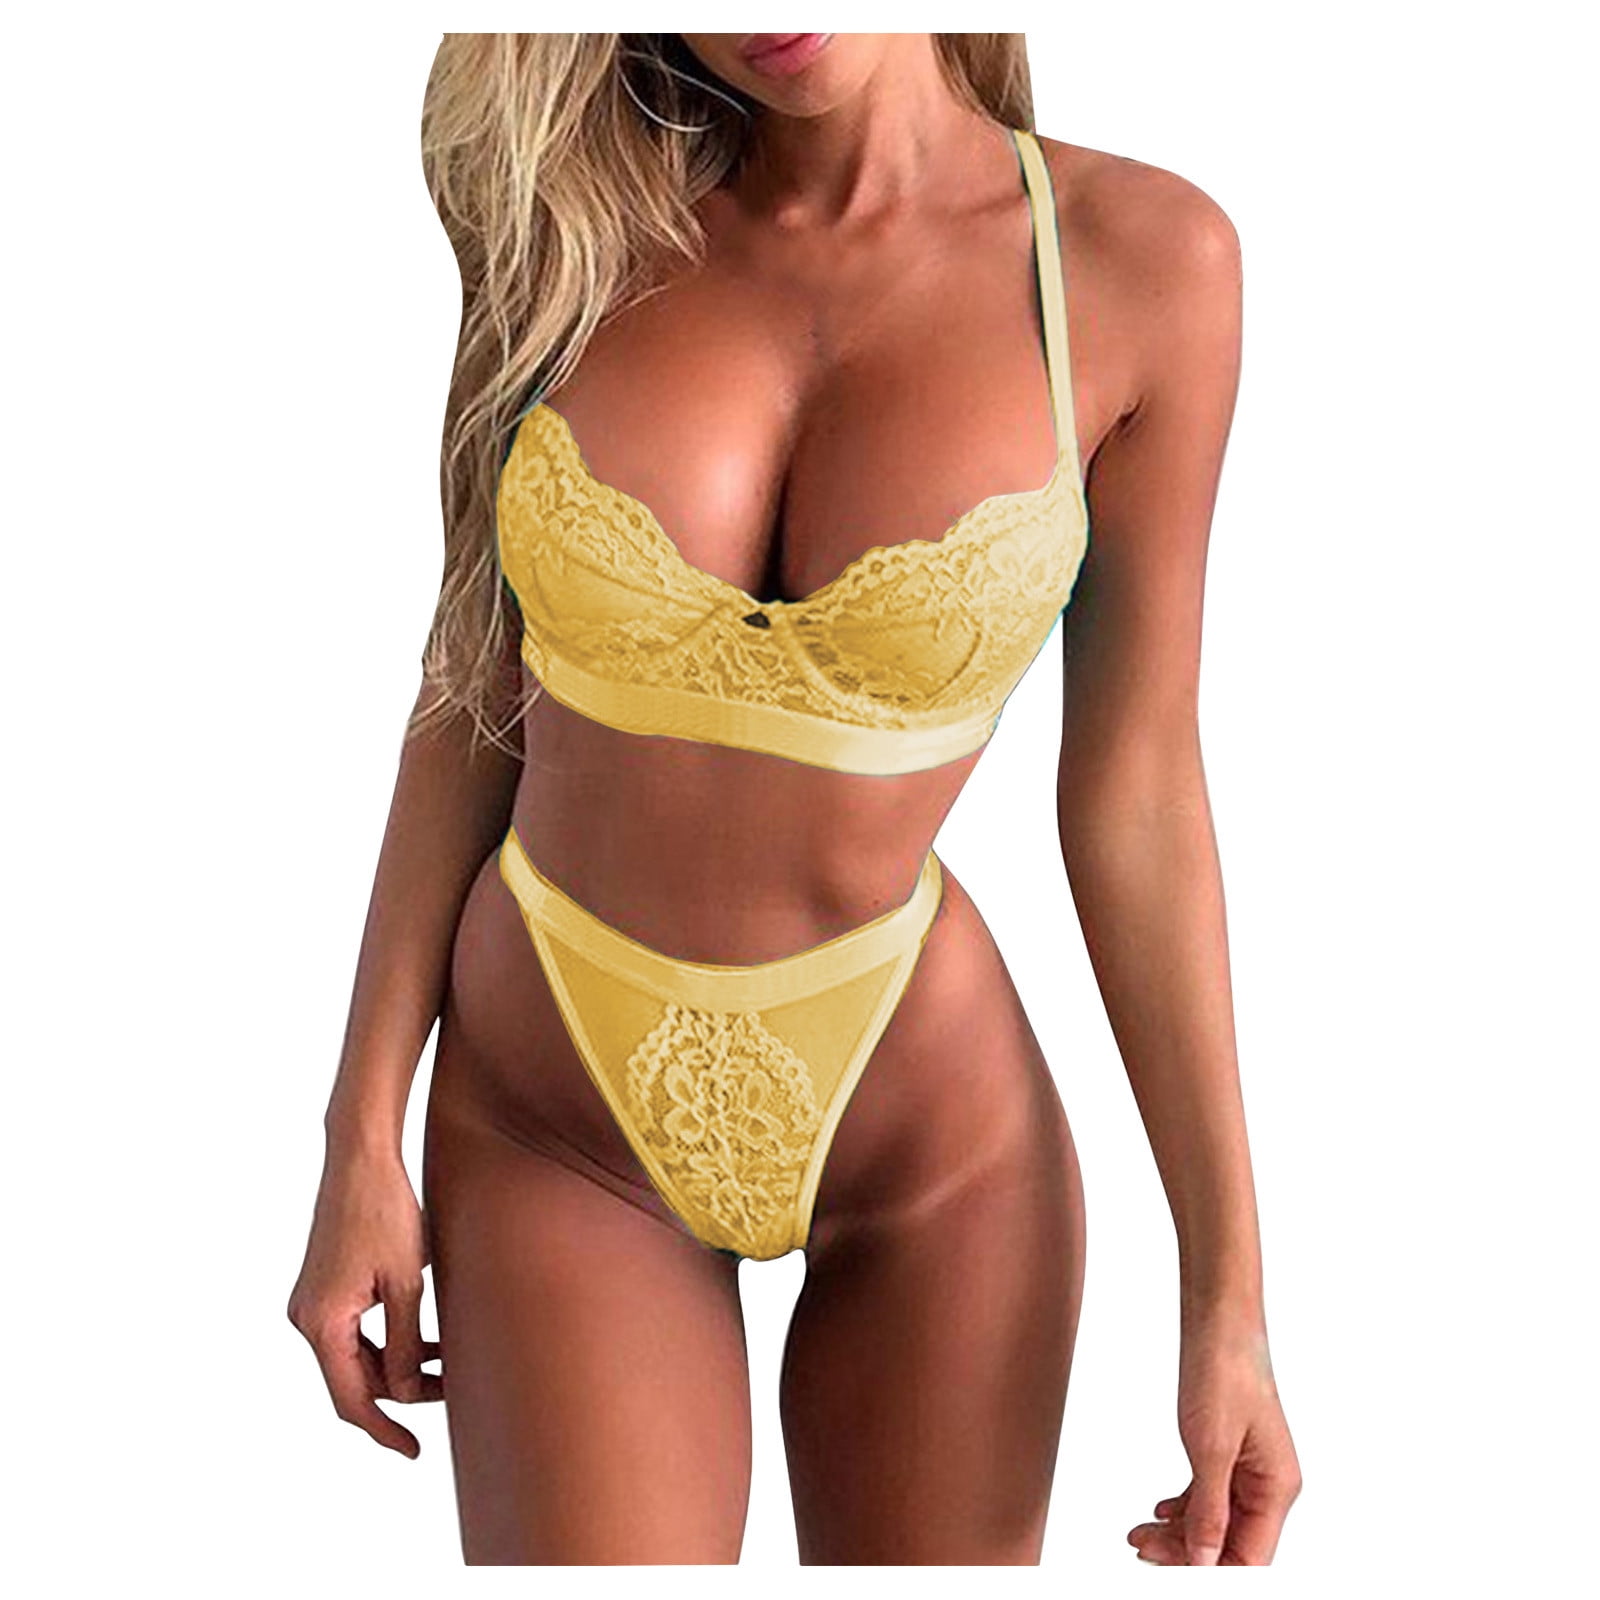 Bikini Air Bra & Panties Women New Sexy Low Waisted ThongEmbroidery Flower  Set Wire Free Push Up Lette Underwear Young Girl And Lingerie From 14 €